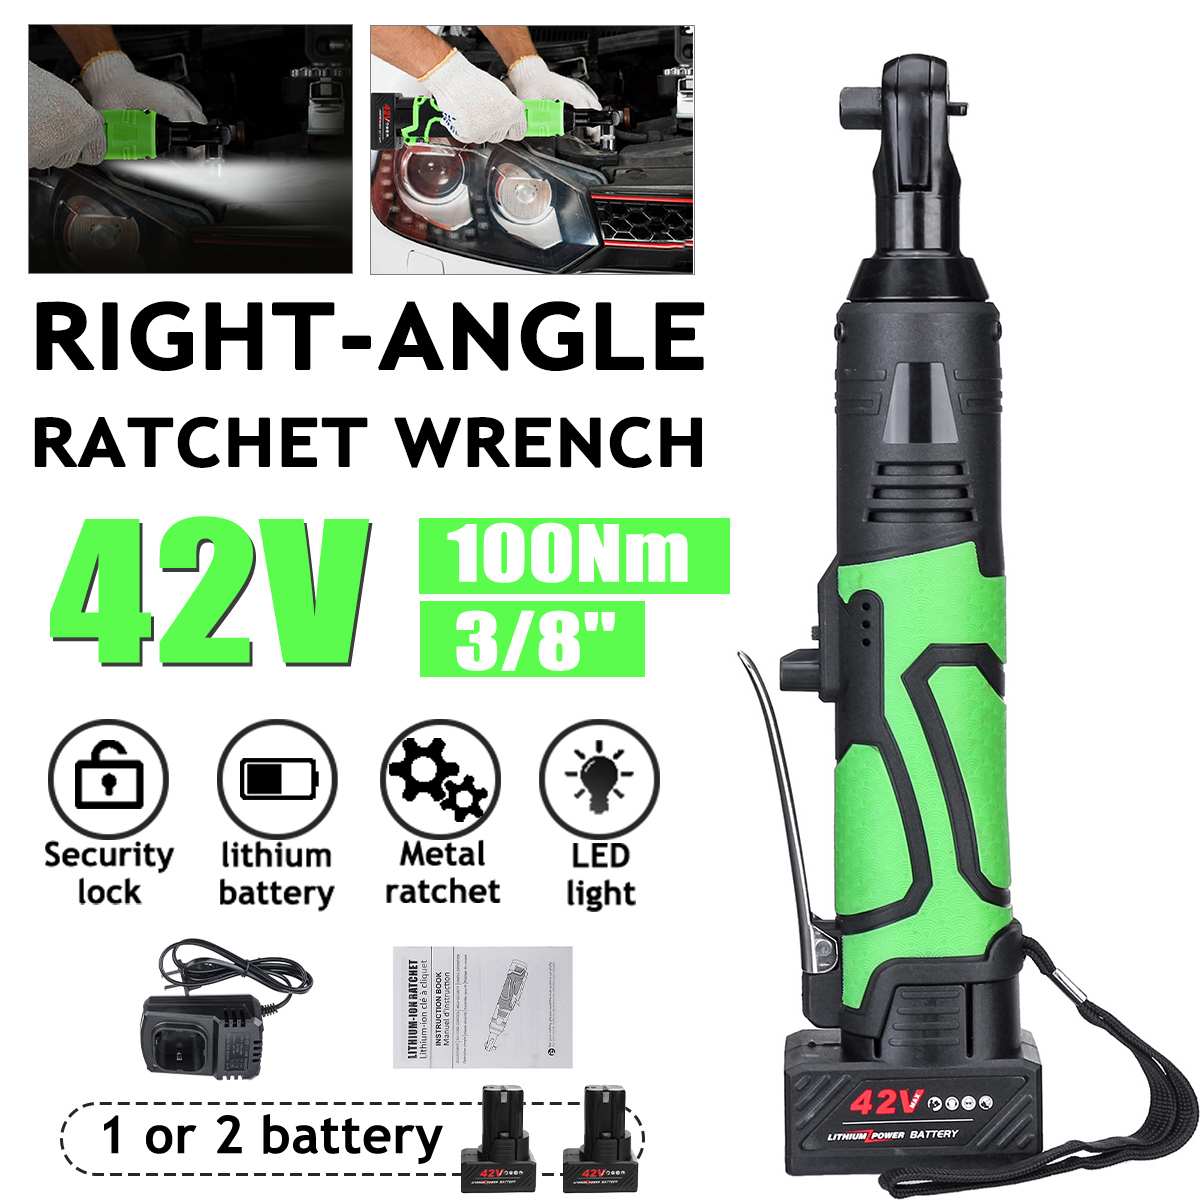 100N.m Electric Wrench 3/8" Cordless Ratchet 42V Rechargeable Scaffolding Right Angle Wrench Tool with 1/2 Battery Charger Kit